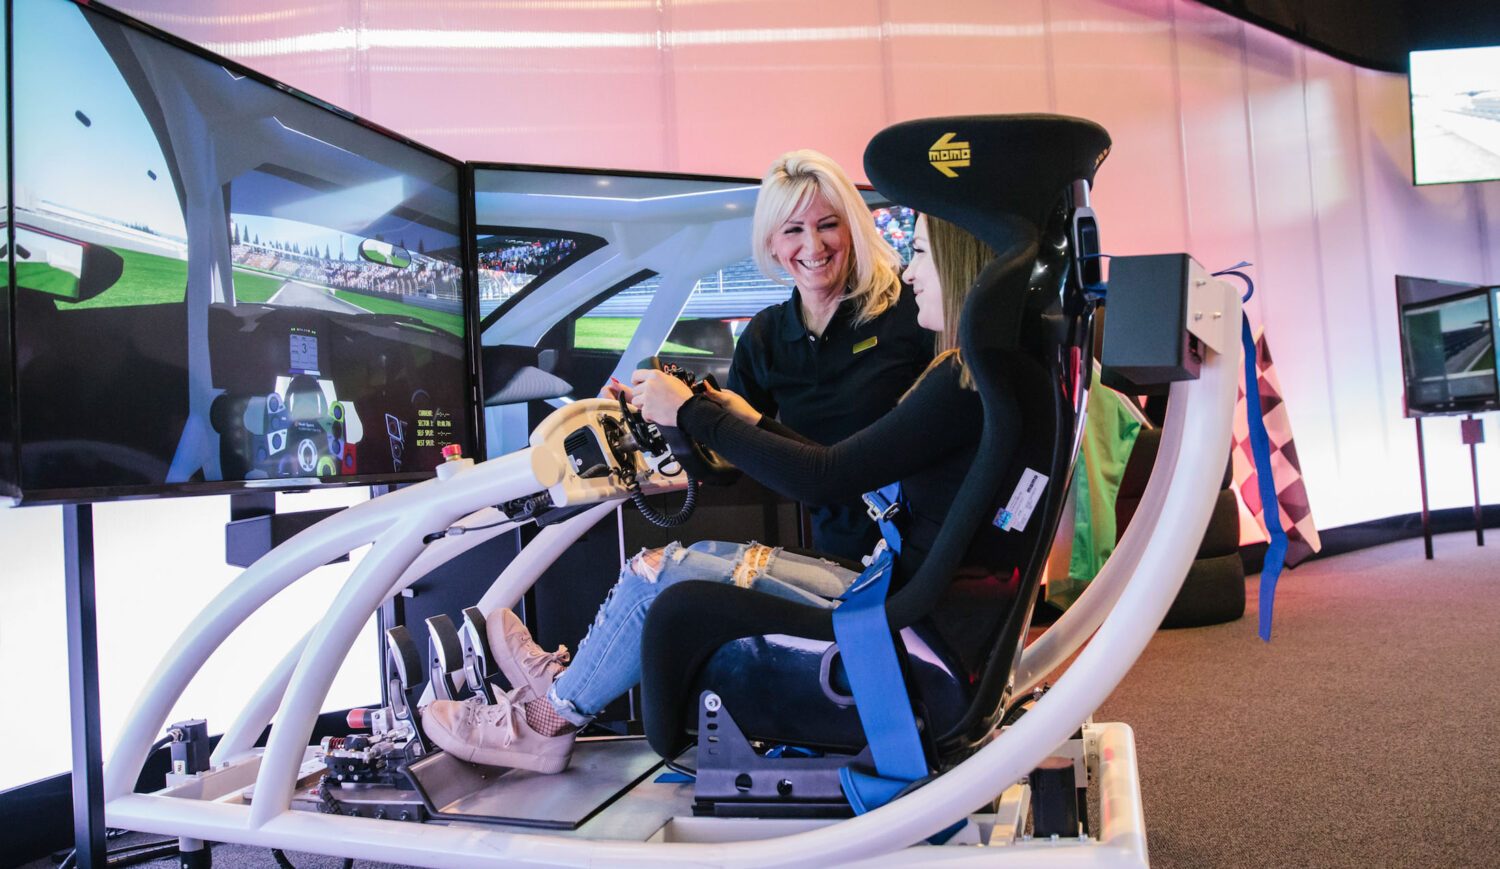 A driving simulator at the Autostadt in Wolfsburg © Anja Weber